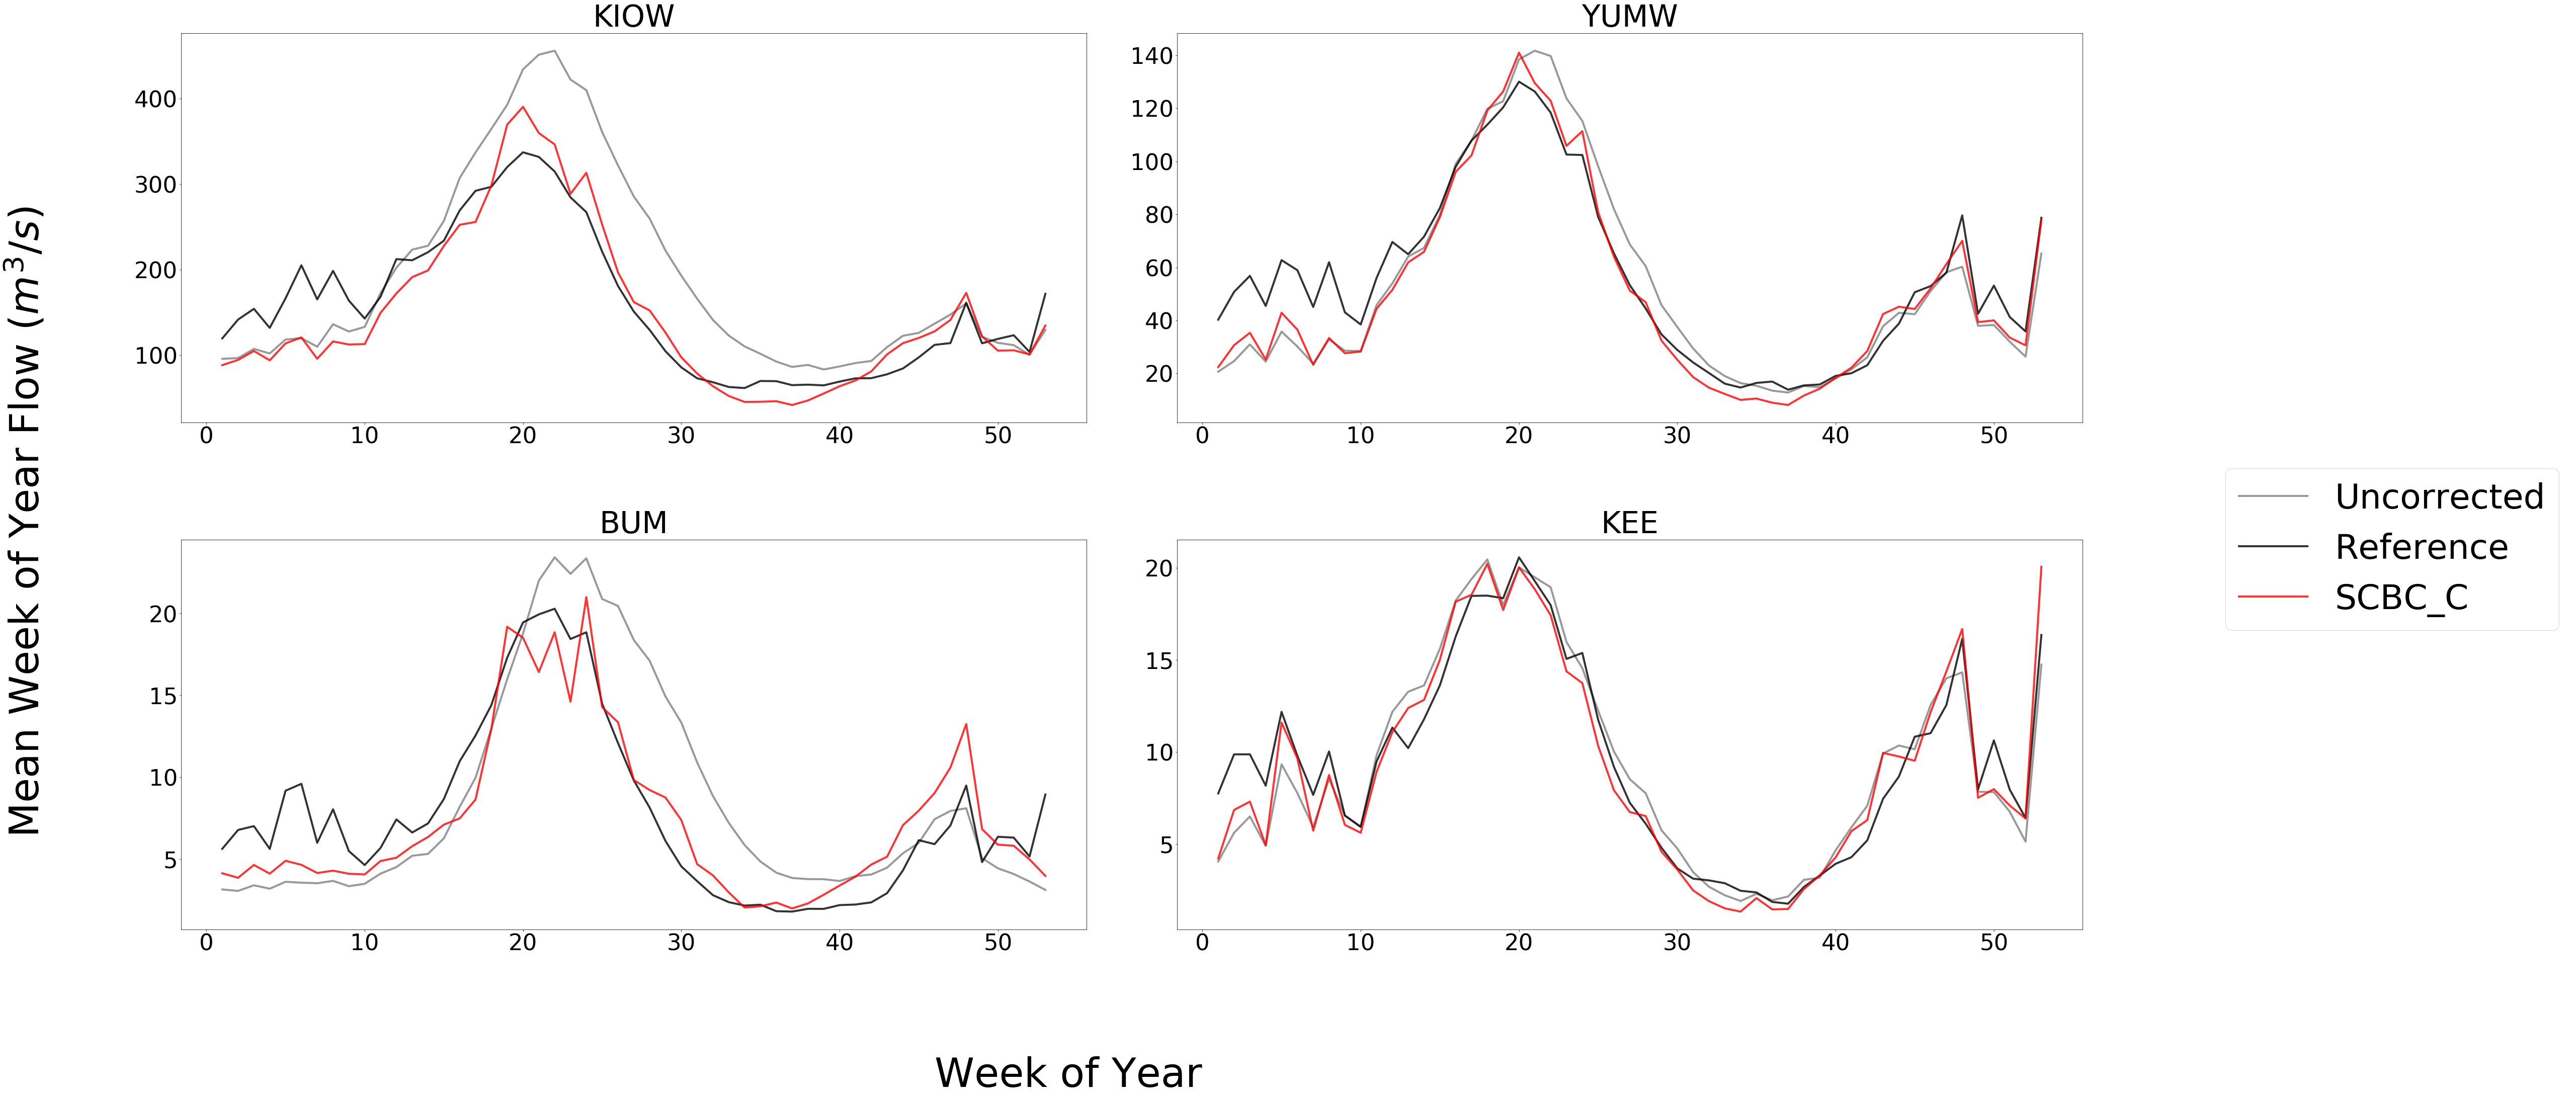 Four time series plots labeled KIOW, YUMW, BUM, and KEE compare mean week of year flows between raw, reference, and scbc_c bias correction.